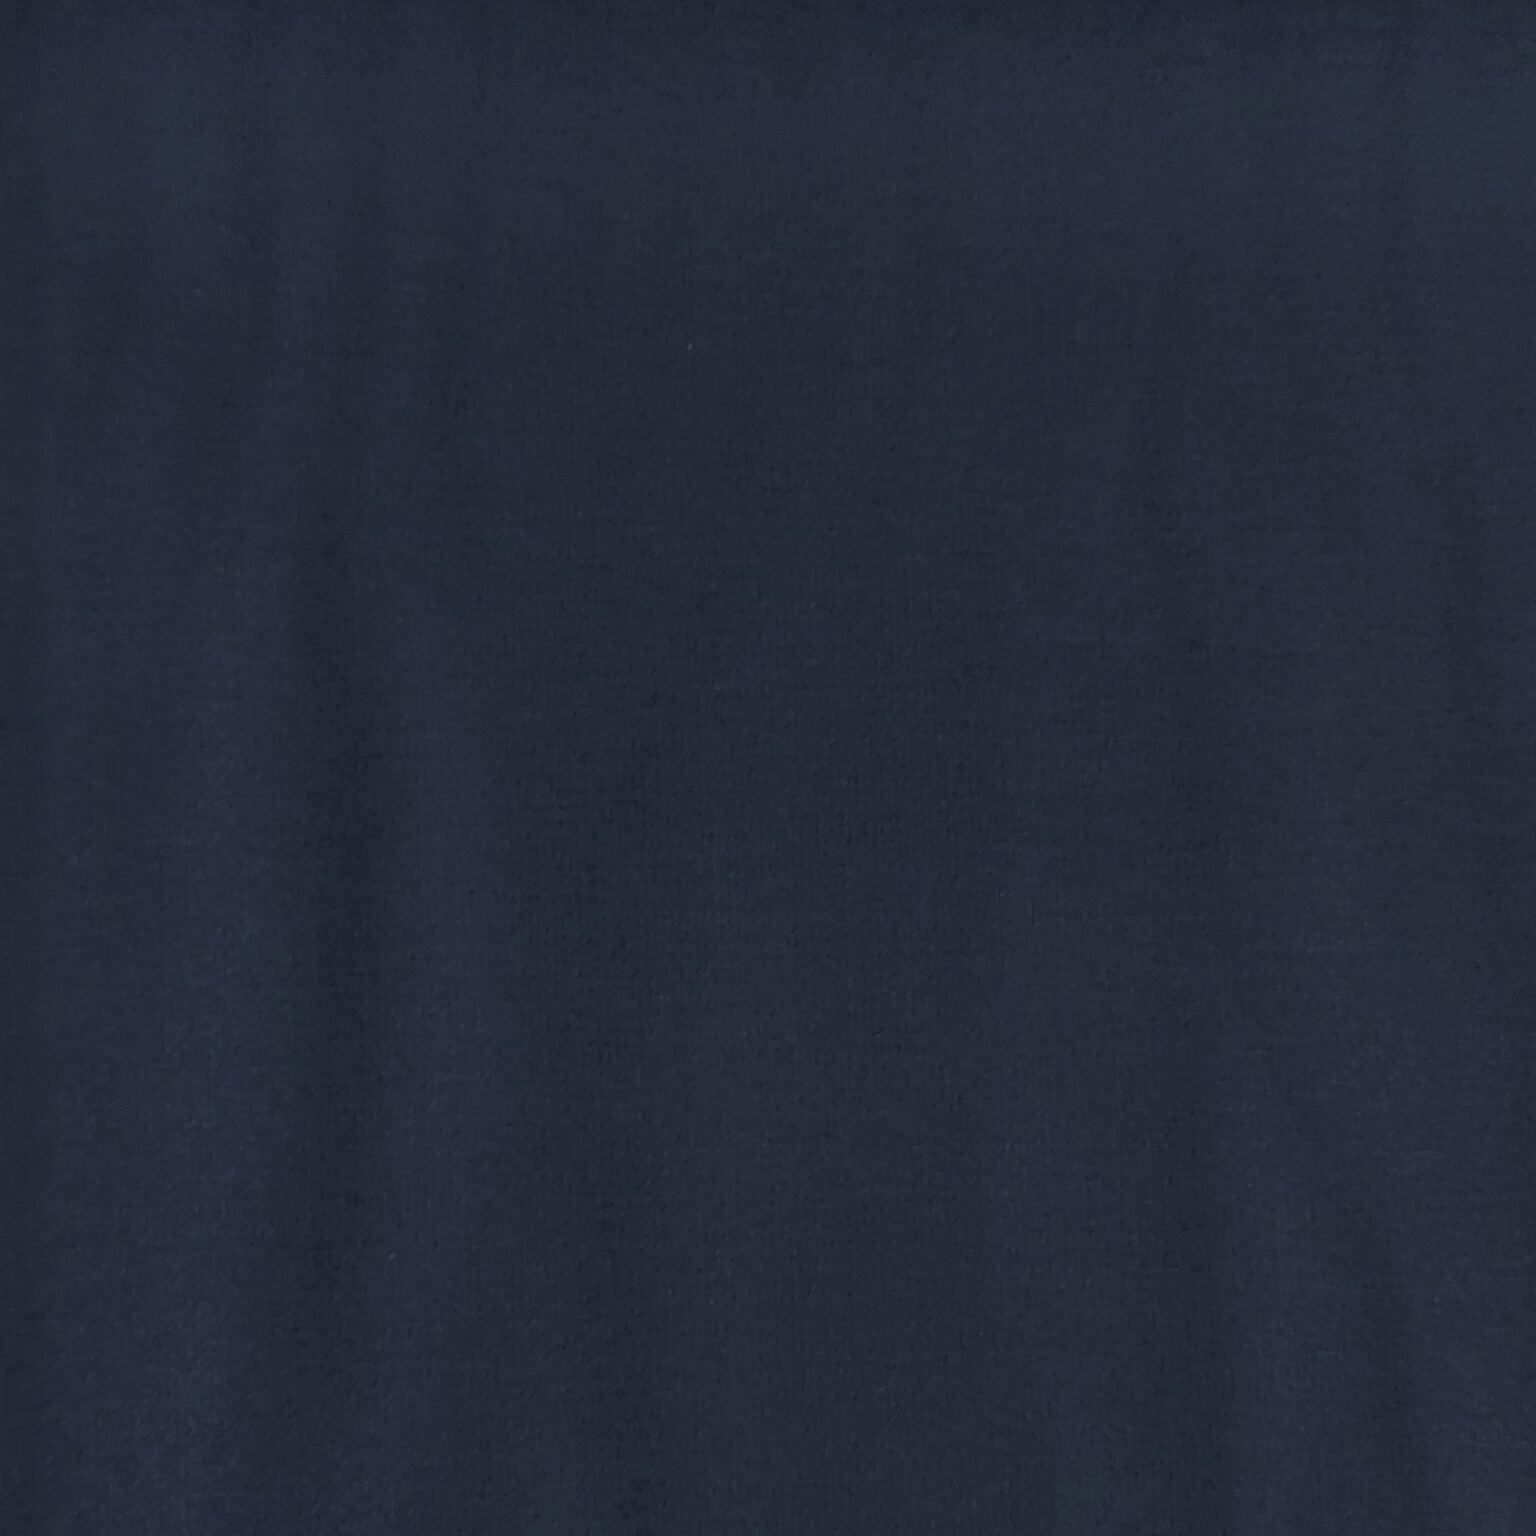 Navy Blue Ponteroma Jersey Fabric | More Sewing